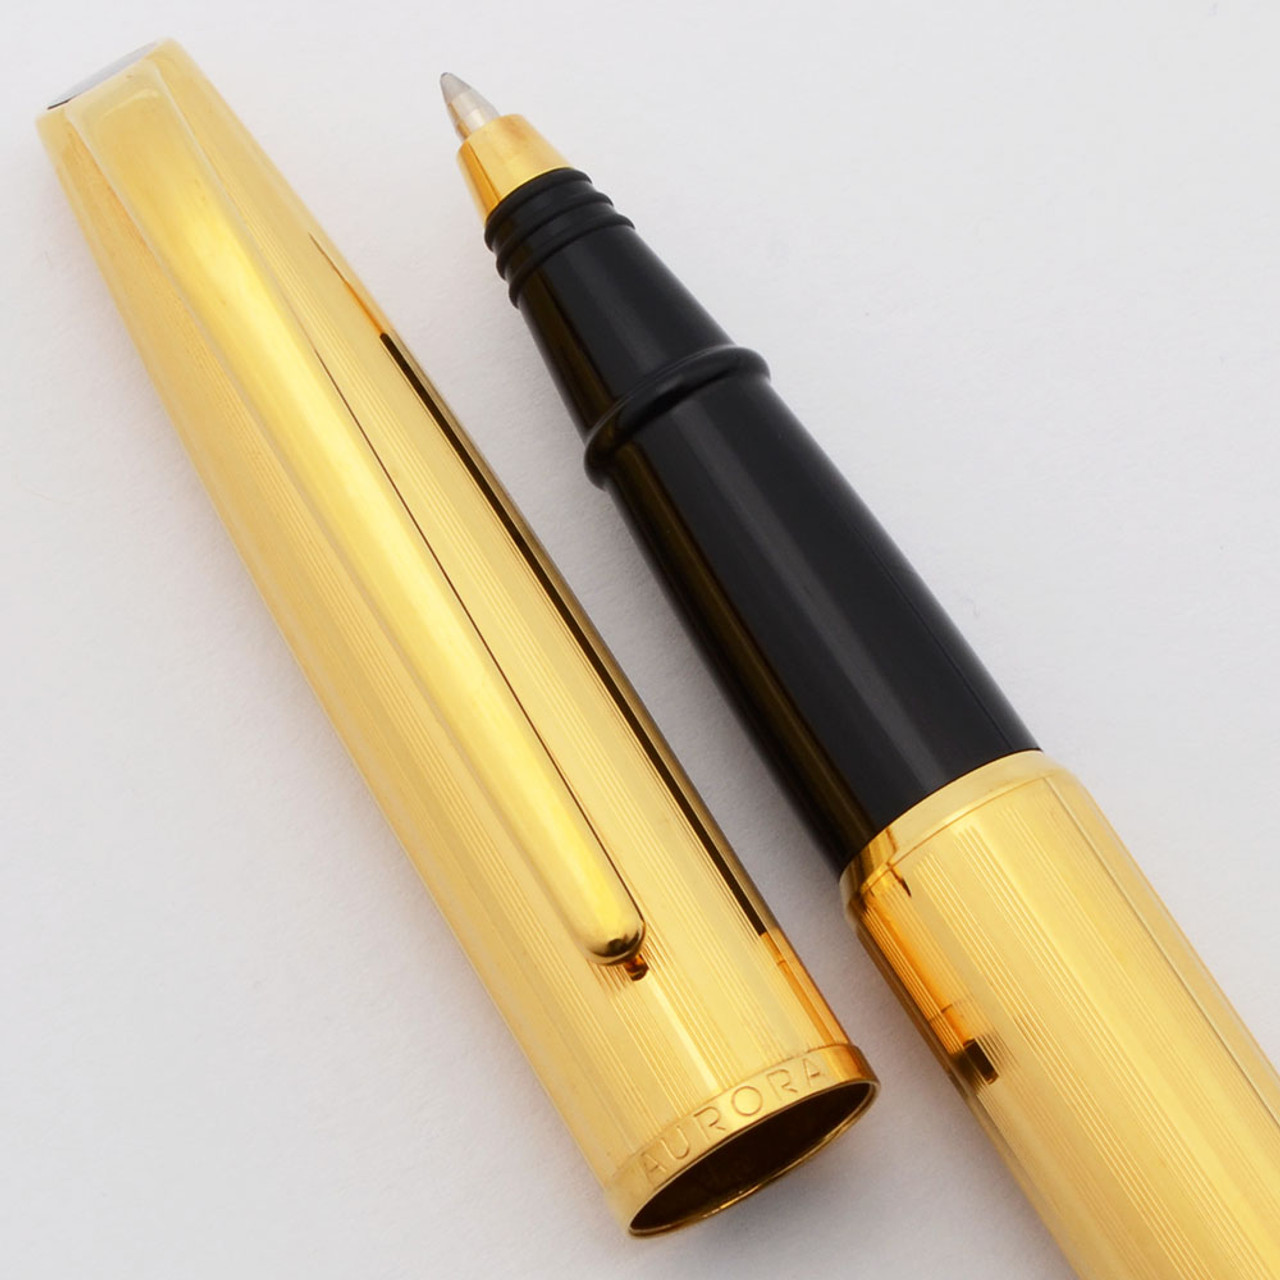 Aurora Style Metal Rollerball Pen - Model E79, Gold Lined Cap & Barrel (Excellent, Works Well)